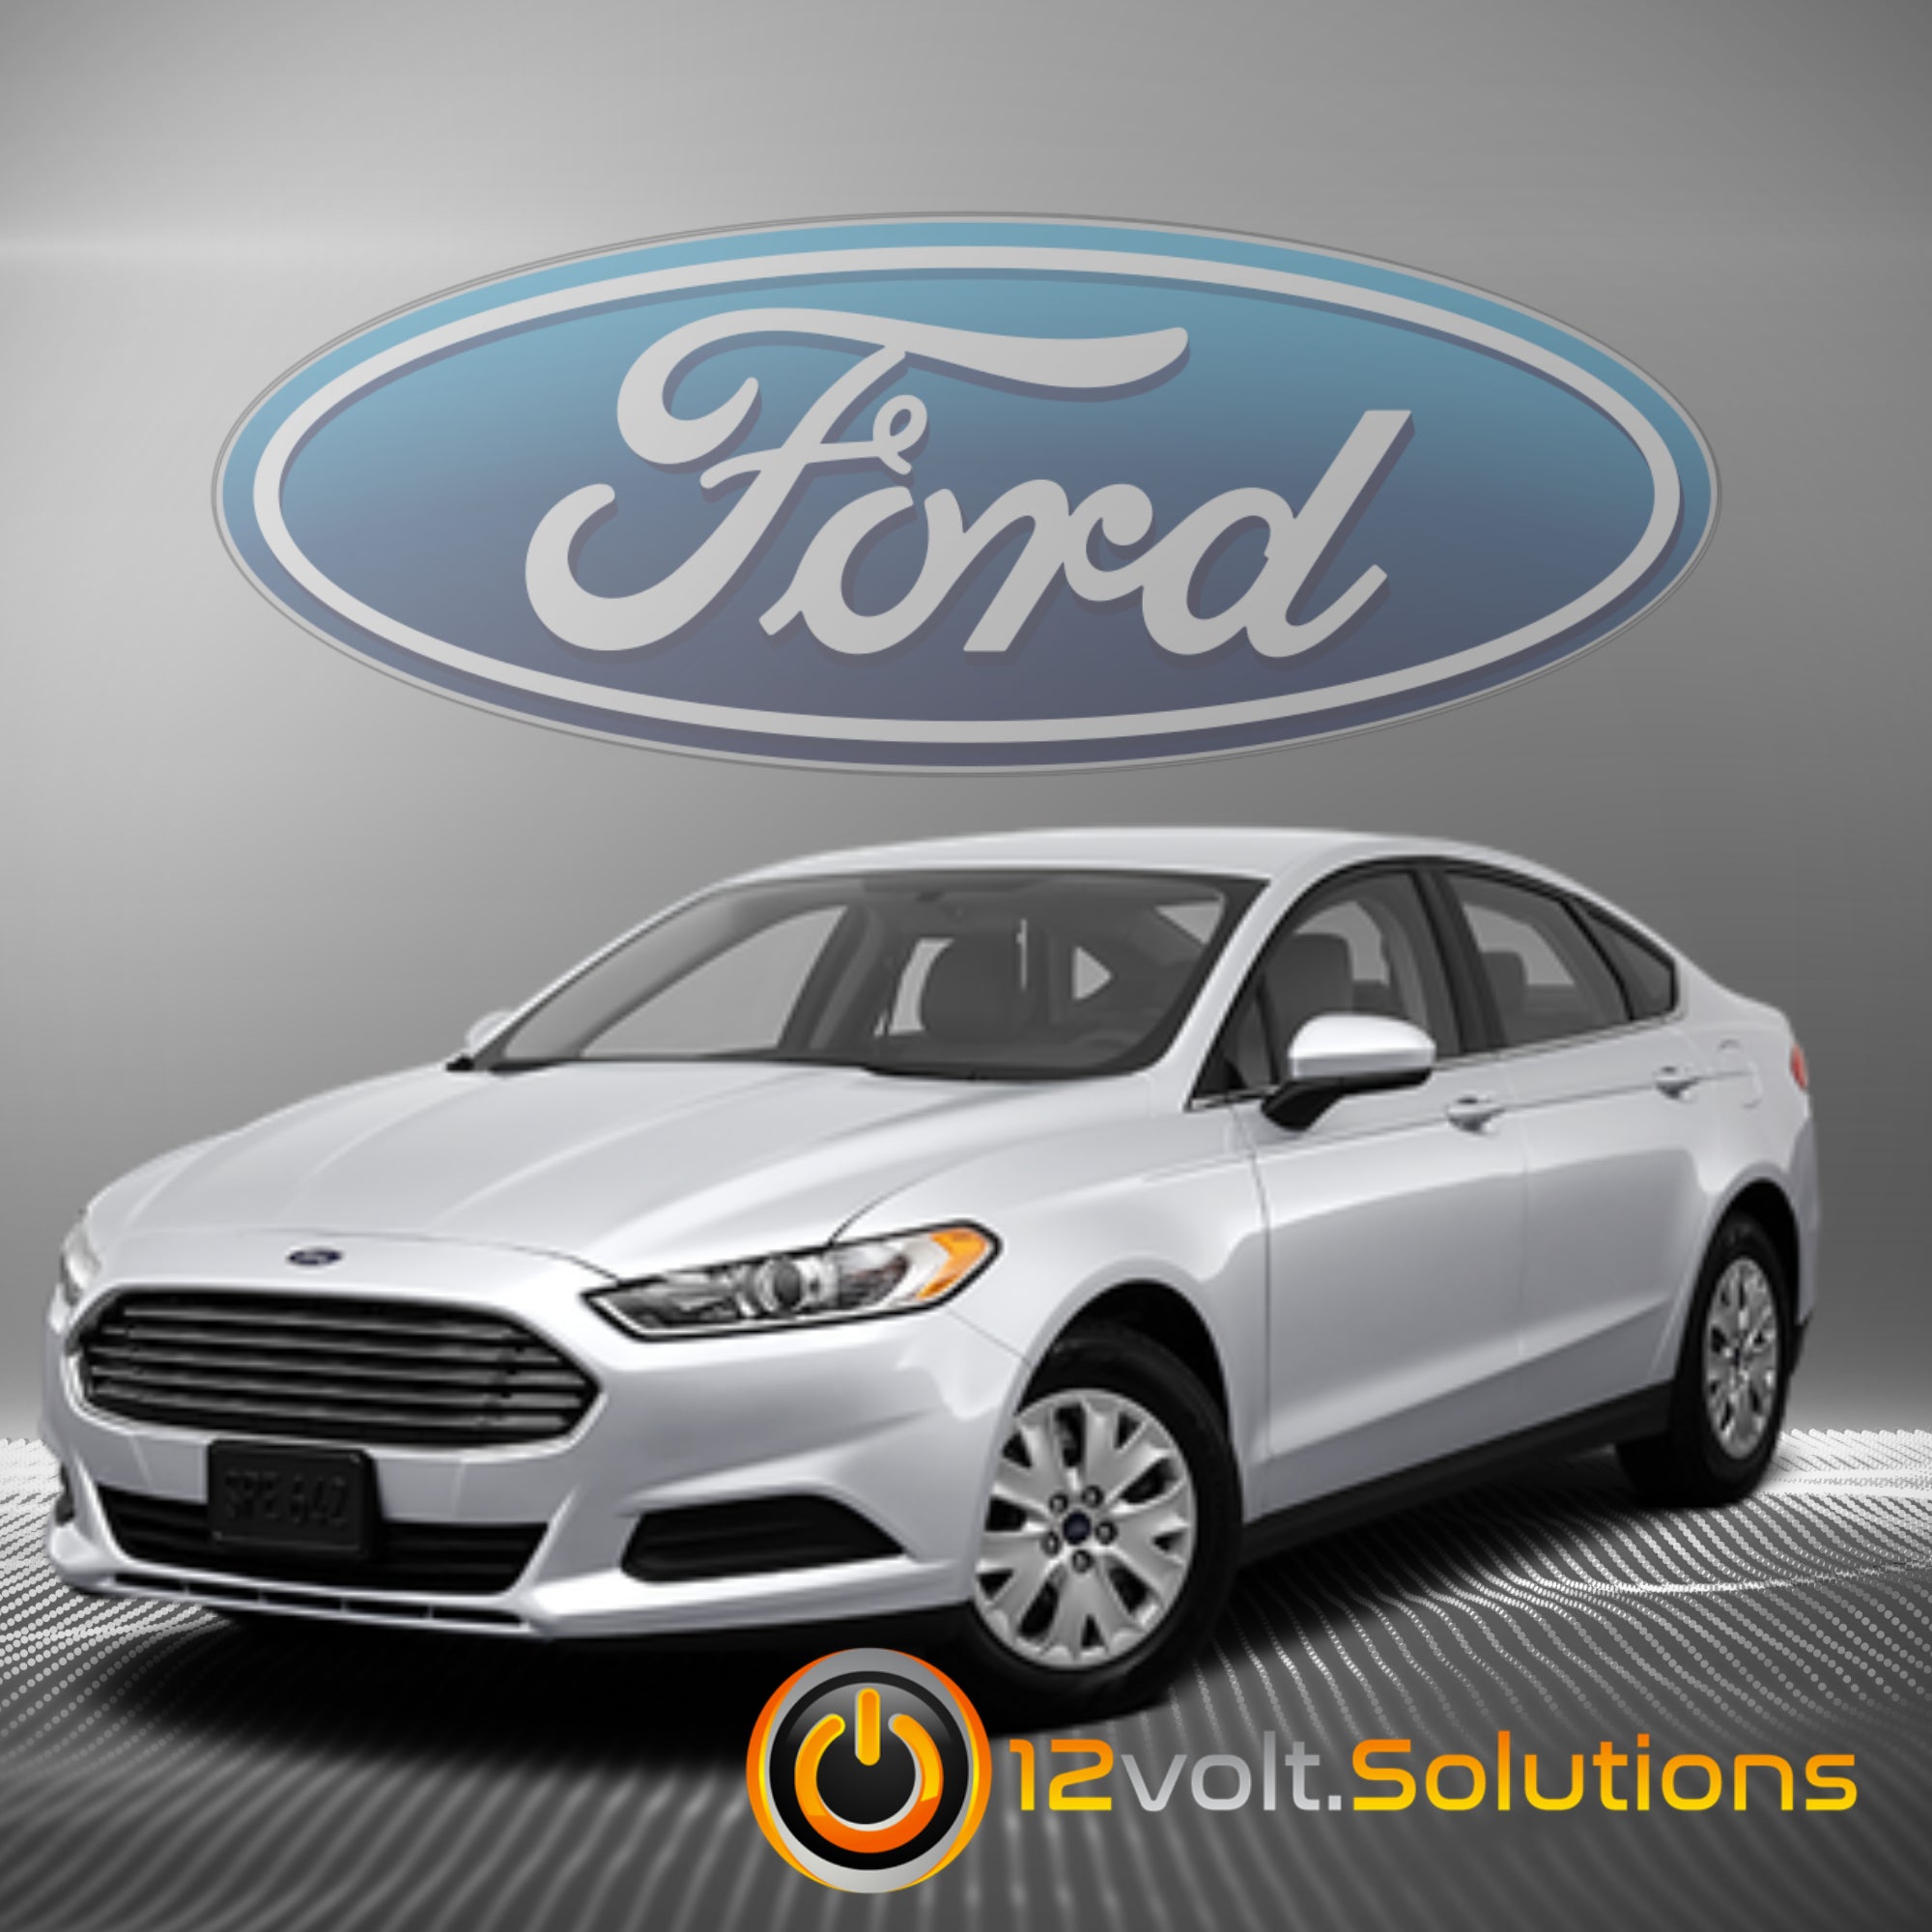 2013 Ford Fusion Remote Start Plug and Play Kit-12Volt.Solutions